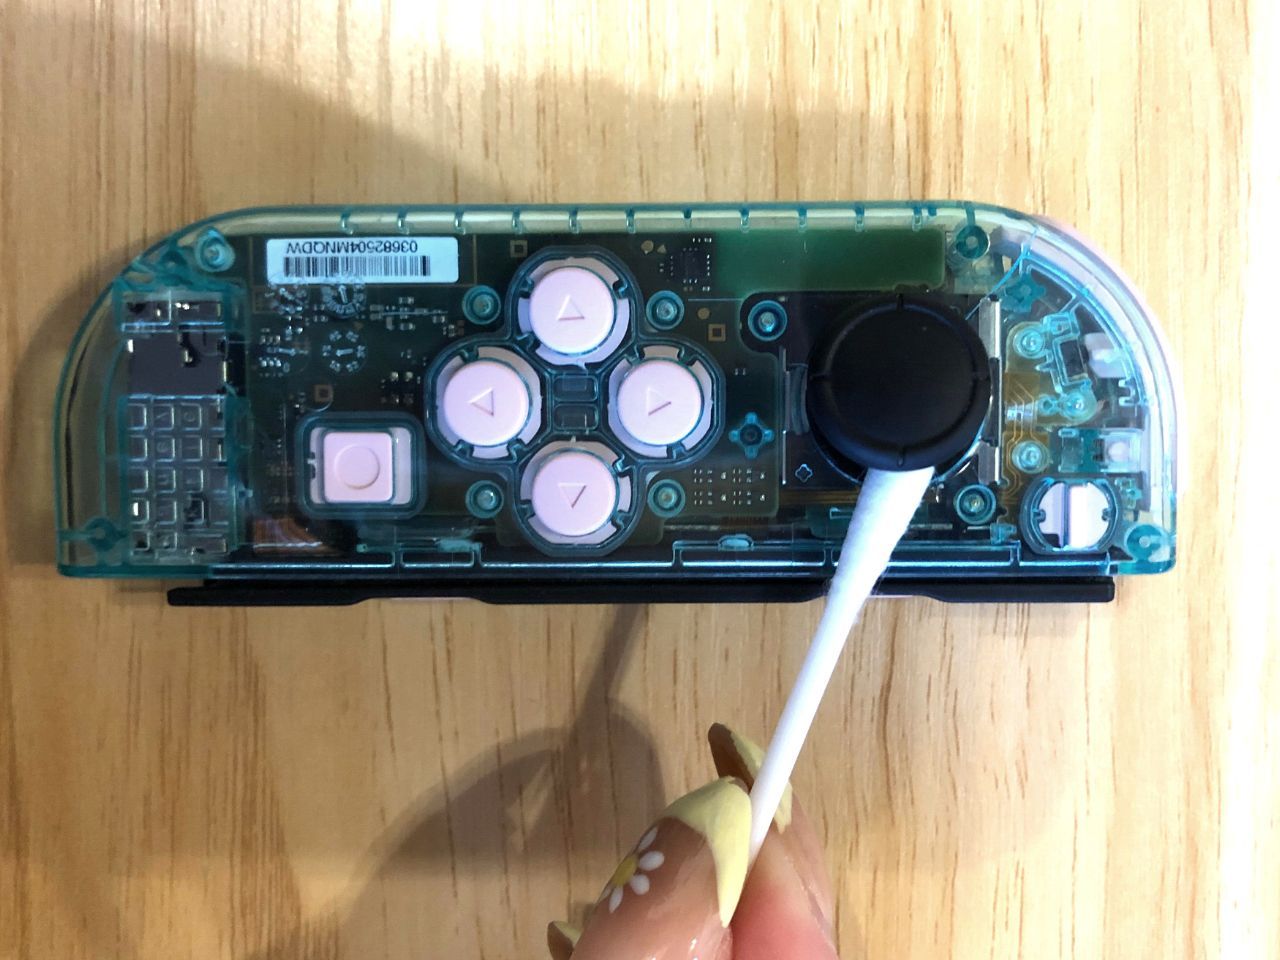 Using a cotton bud to clean underneath the Joy Con analog stick